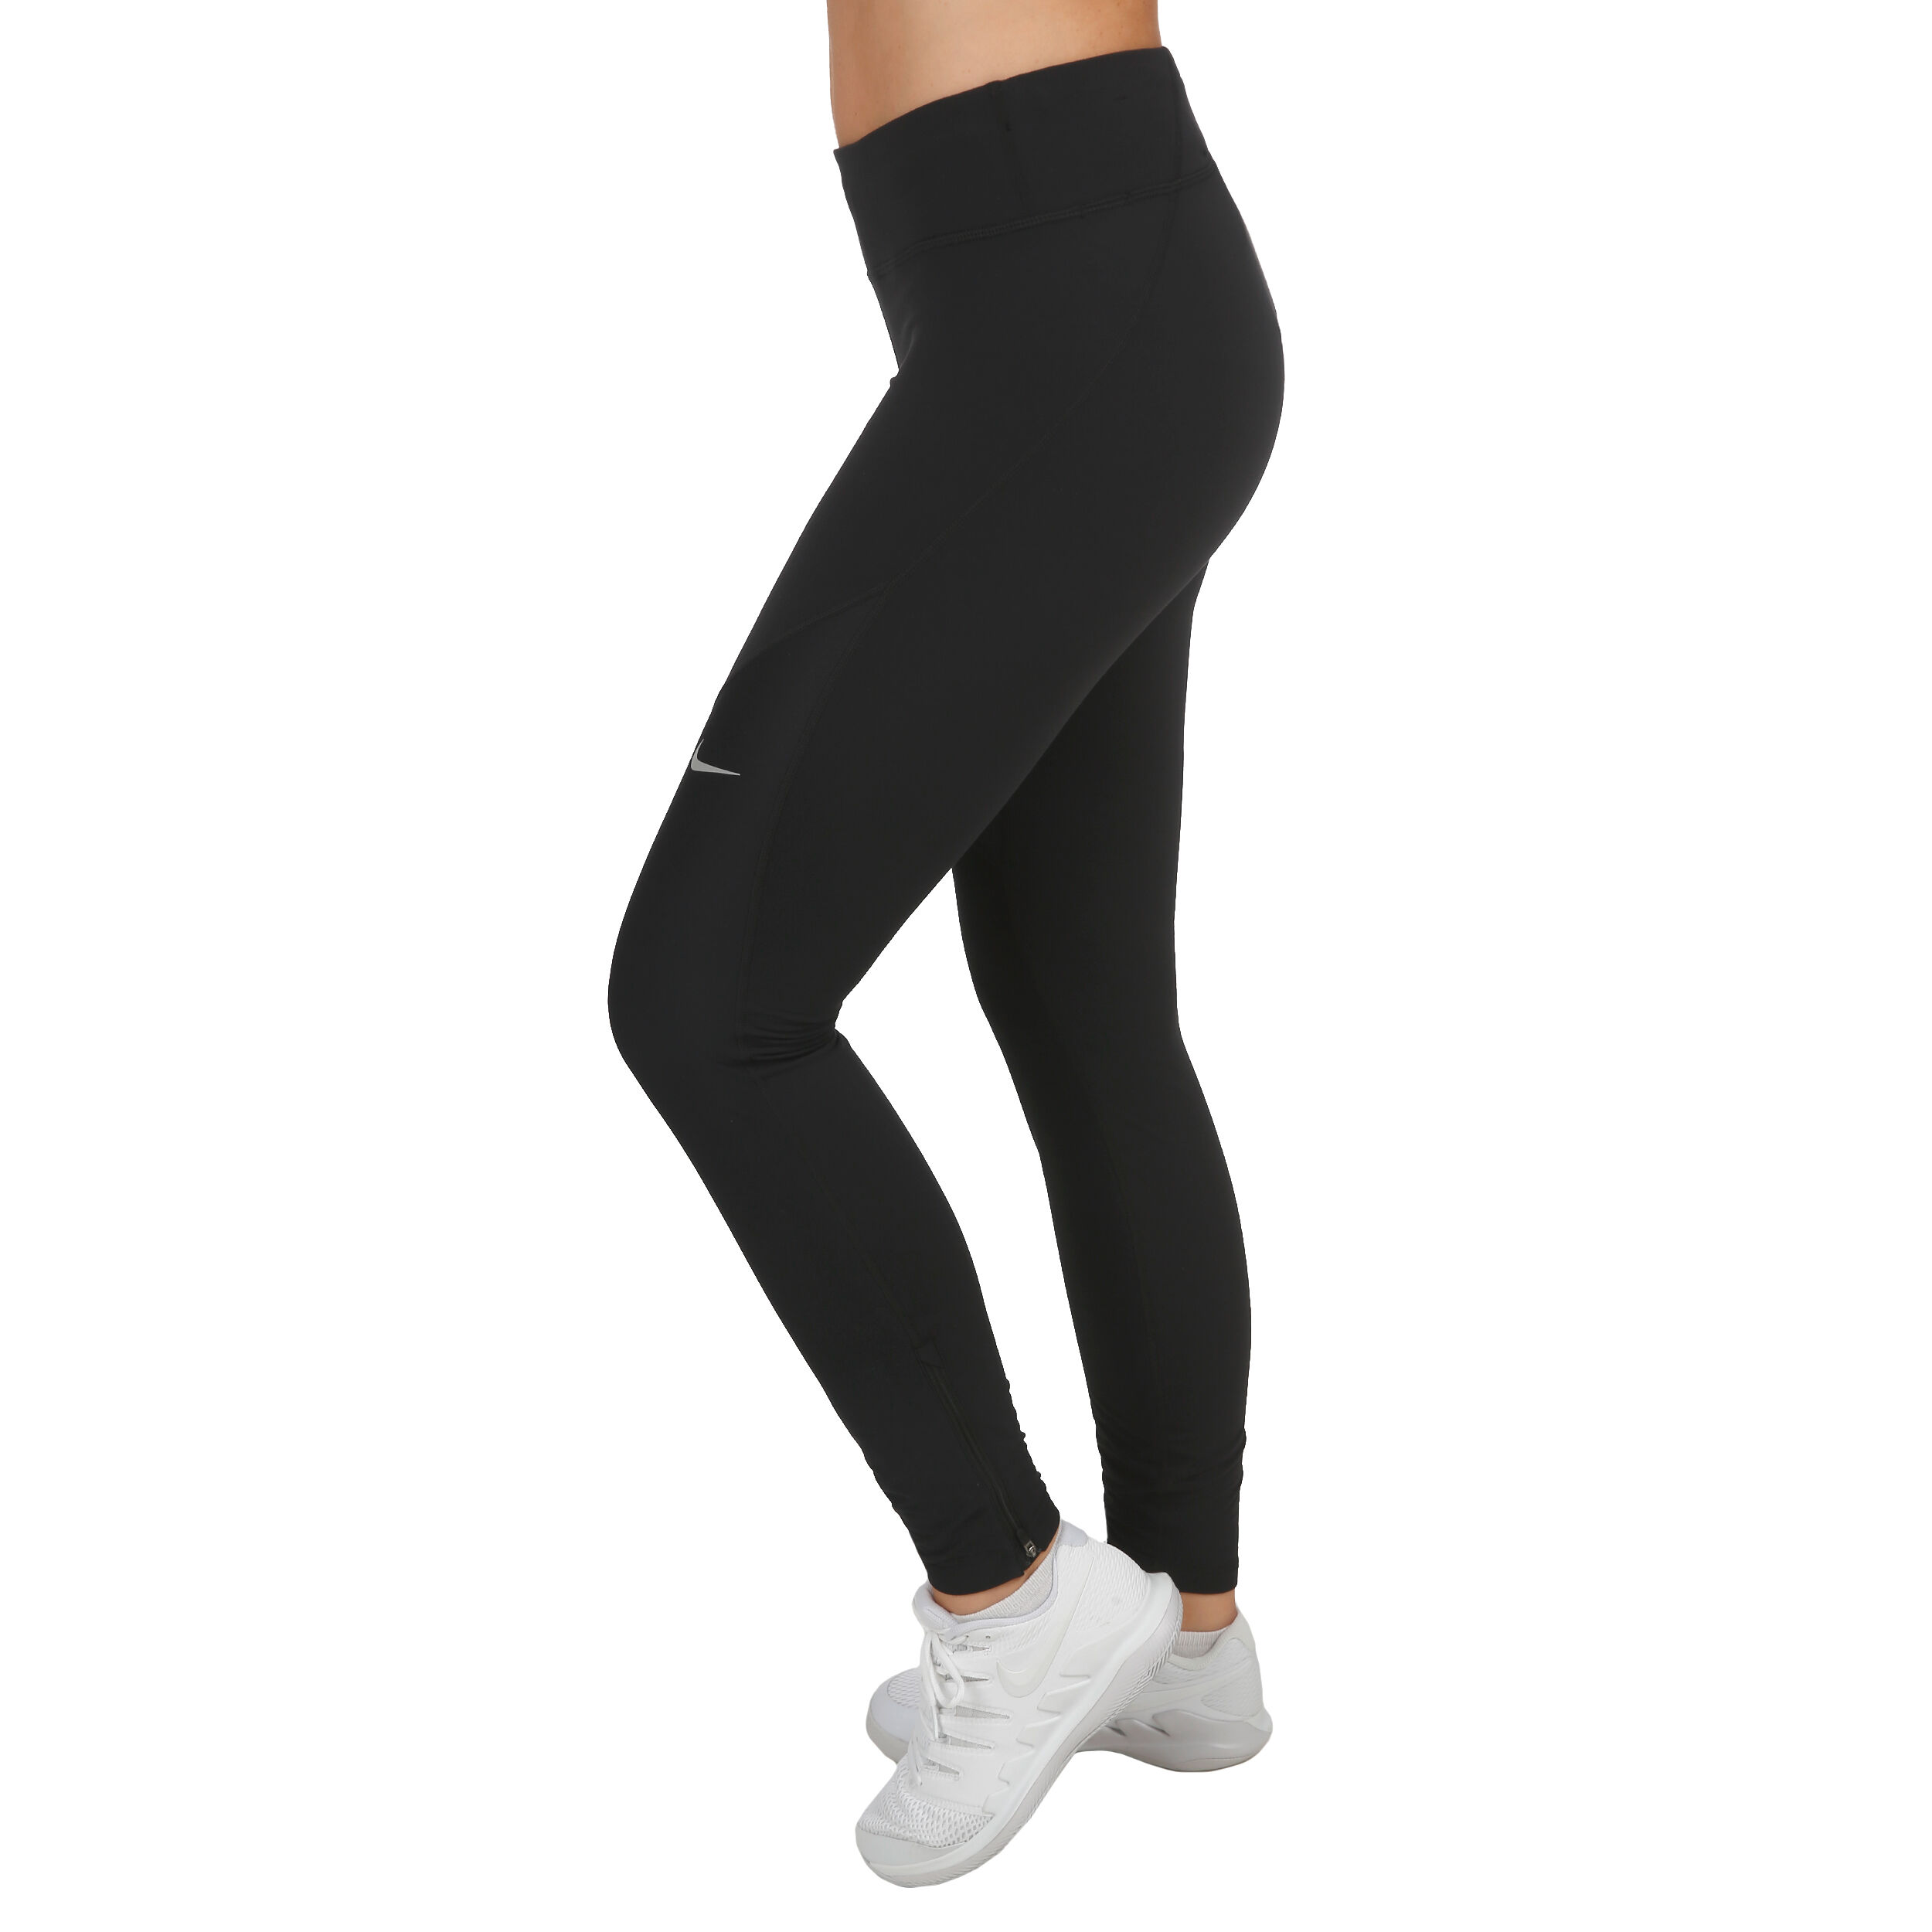 nike epic lux shield women's running tights